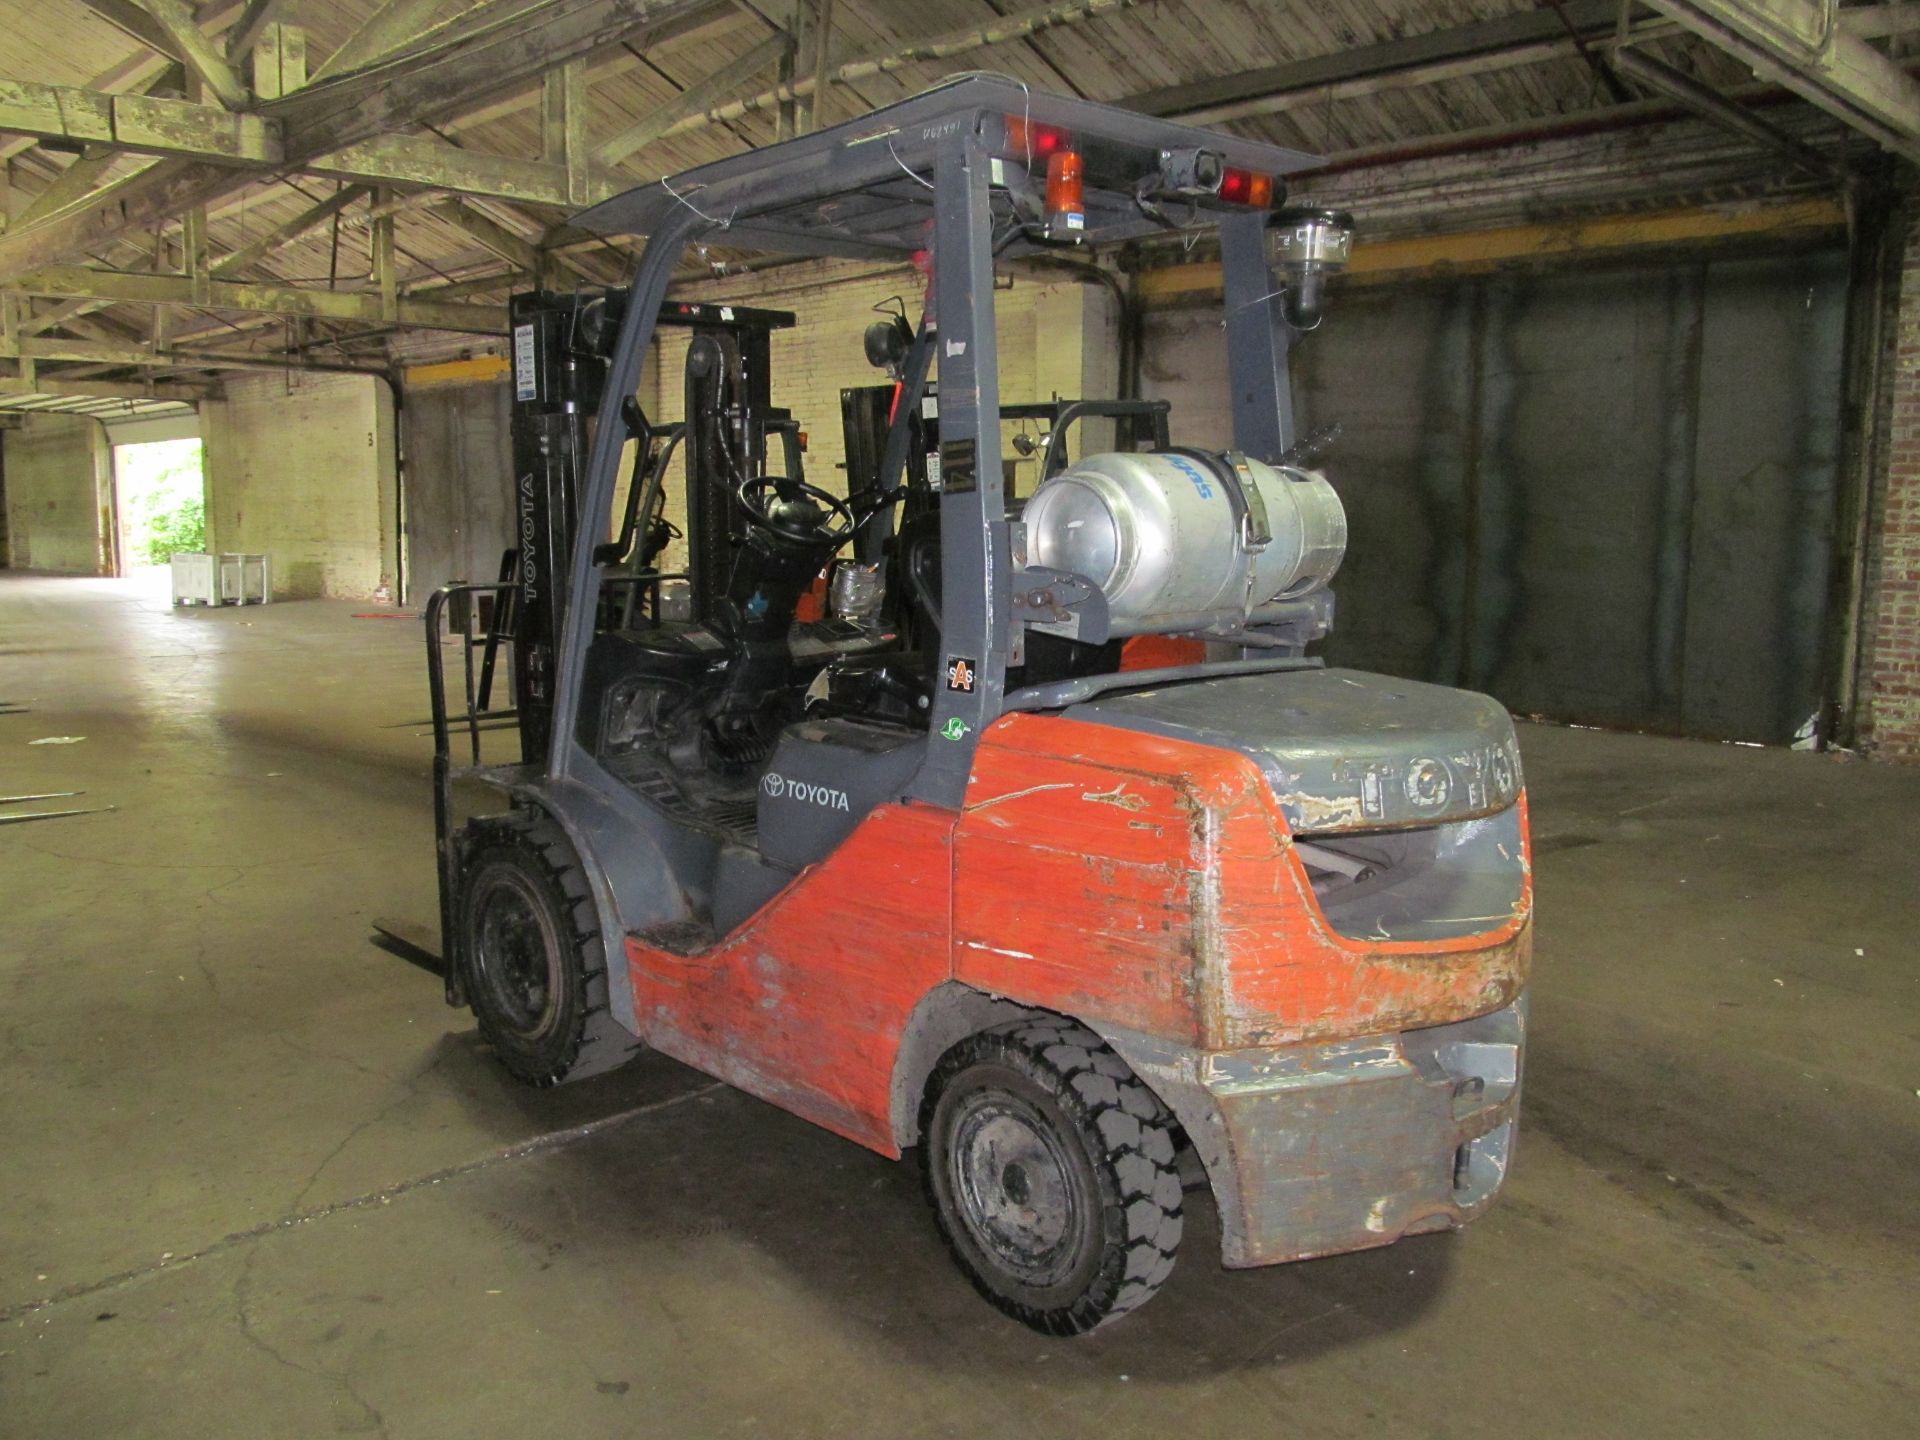 Toyota 5,820 lb. Cap. Model 8FGU30 LP Fork Lift Truck, S/N: 35001; with 2-Stage Mast, Side Shift, - Image 5 of 7